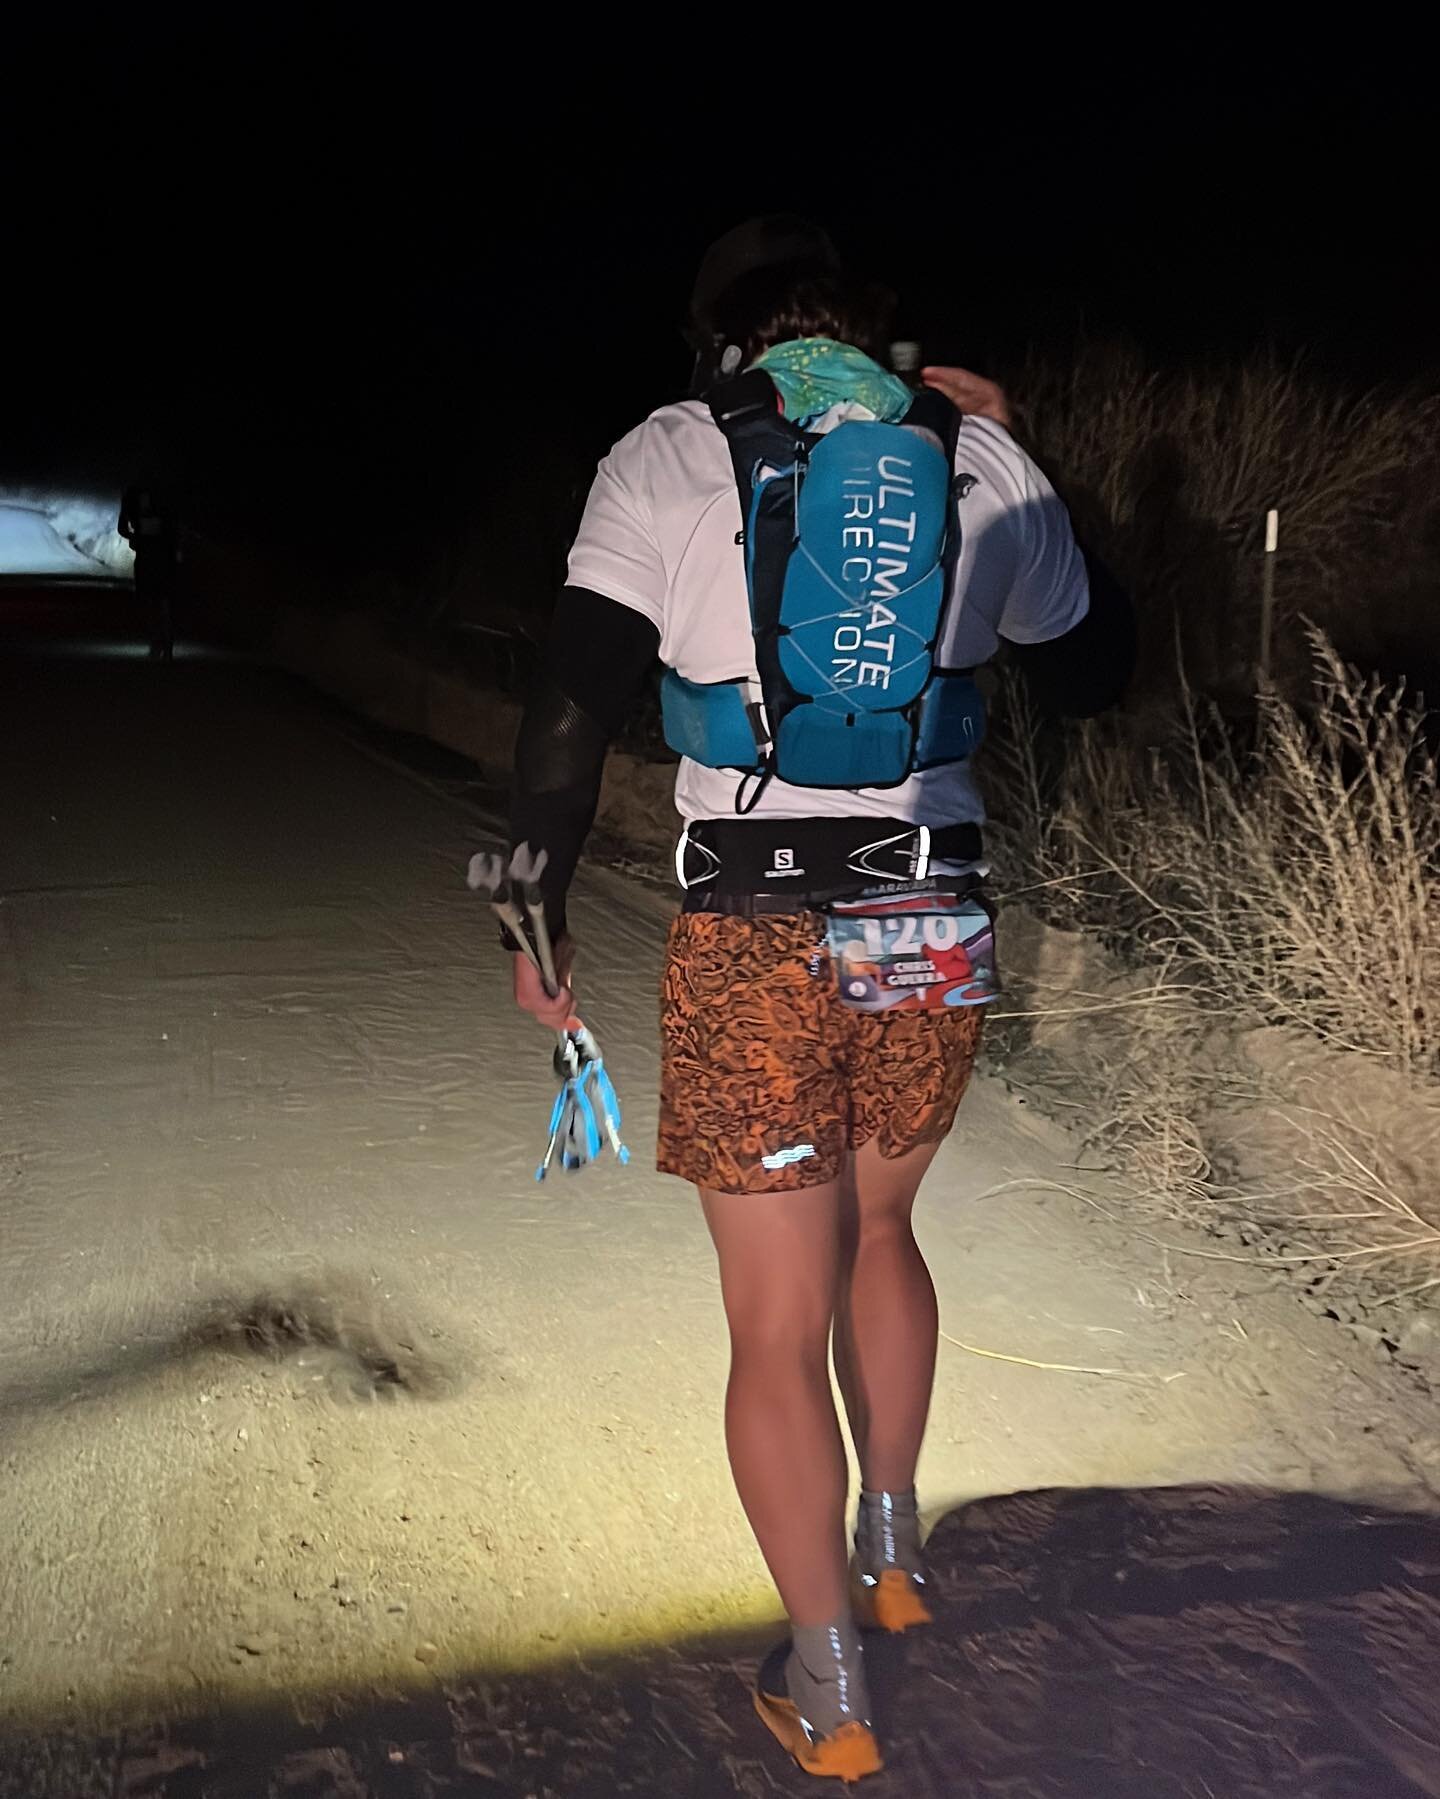 Heading out into the night to complete day 1 lighting my way with the @kogalla light! Climbing is the agenda for this evening with a total of 4,478 elevation gain. I will stroll into the Whiskey Row aid station early in the morning to sleep for a bit